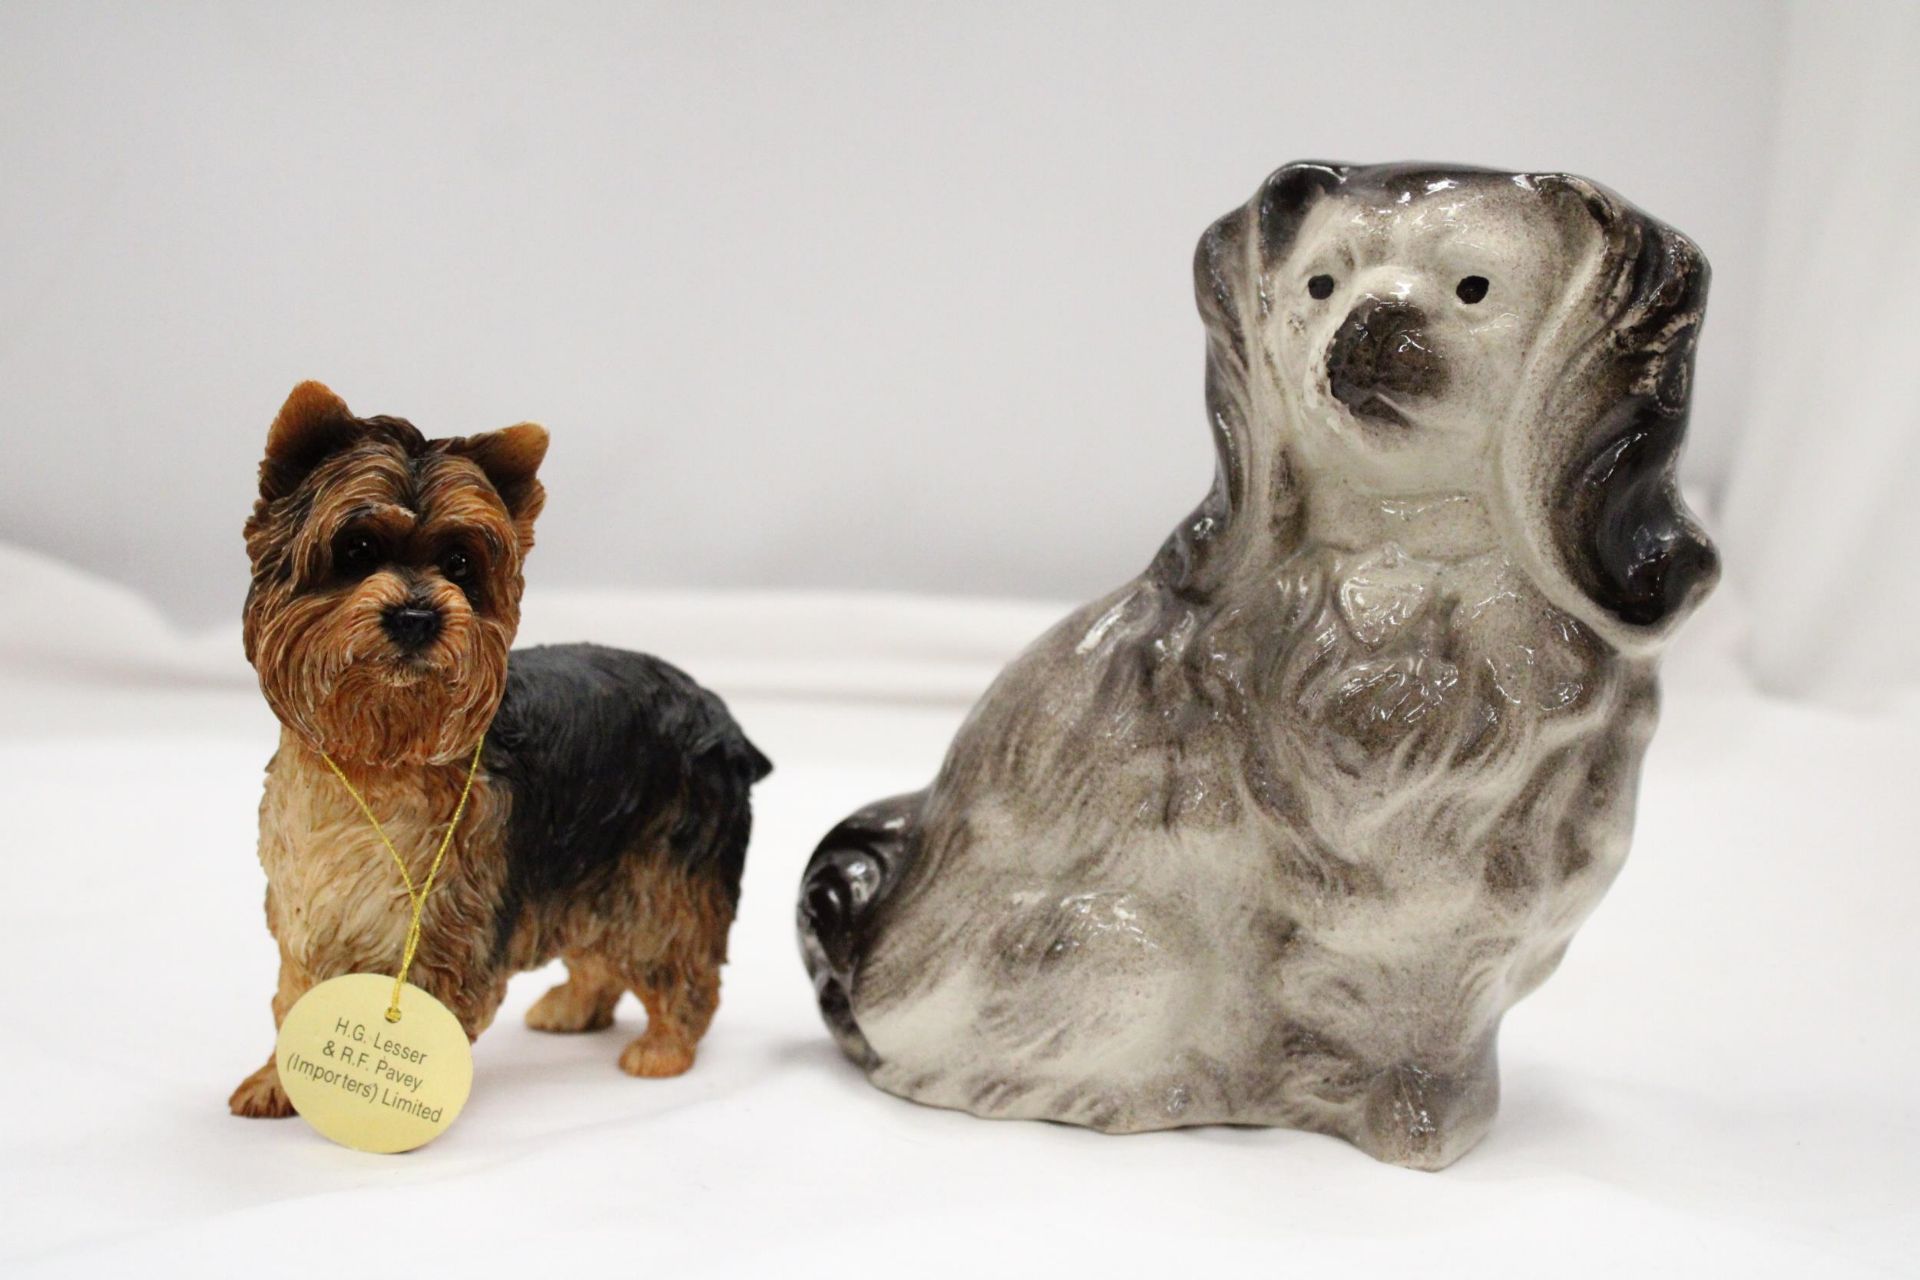 A FIGURE OF A MANTLE BLACK SPANIEL DOG AND A FURTHER LEONARD COLLECTION FIGURE OF A YORKSHIRE - Image 2 of 5